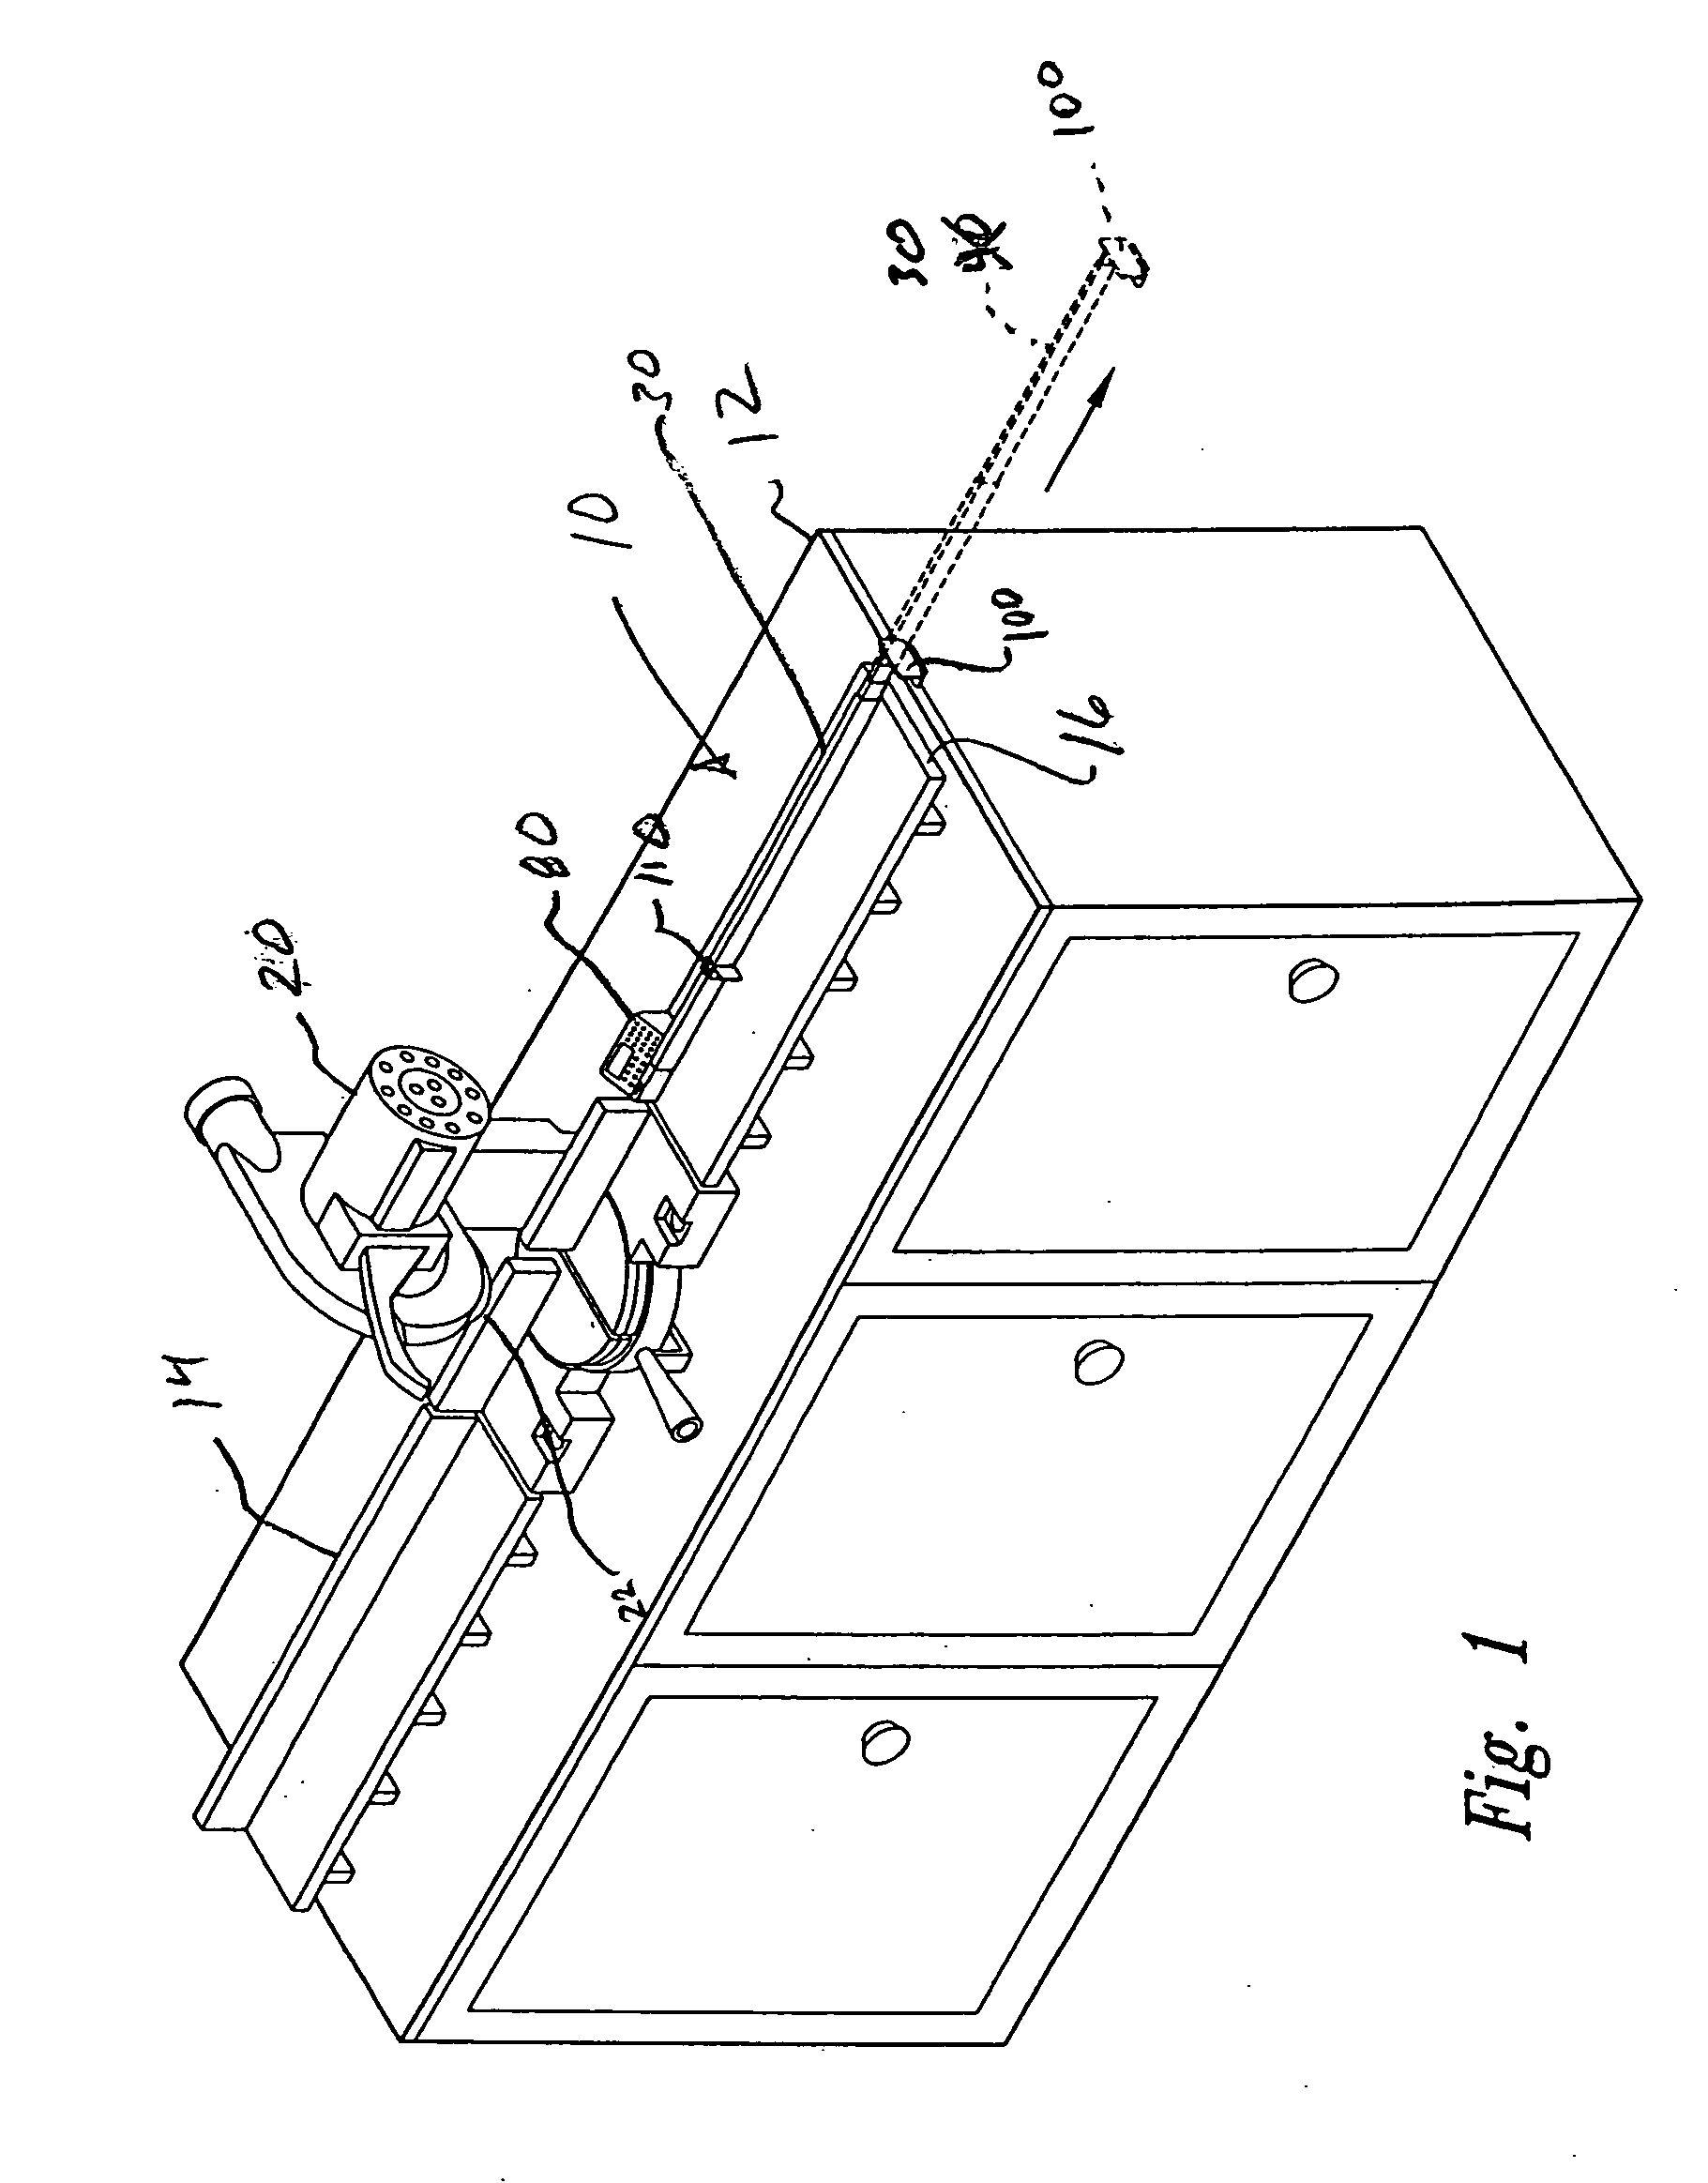 Repetitive fence for cross-cutting materials